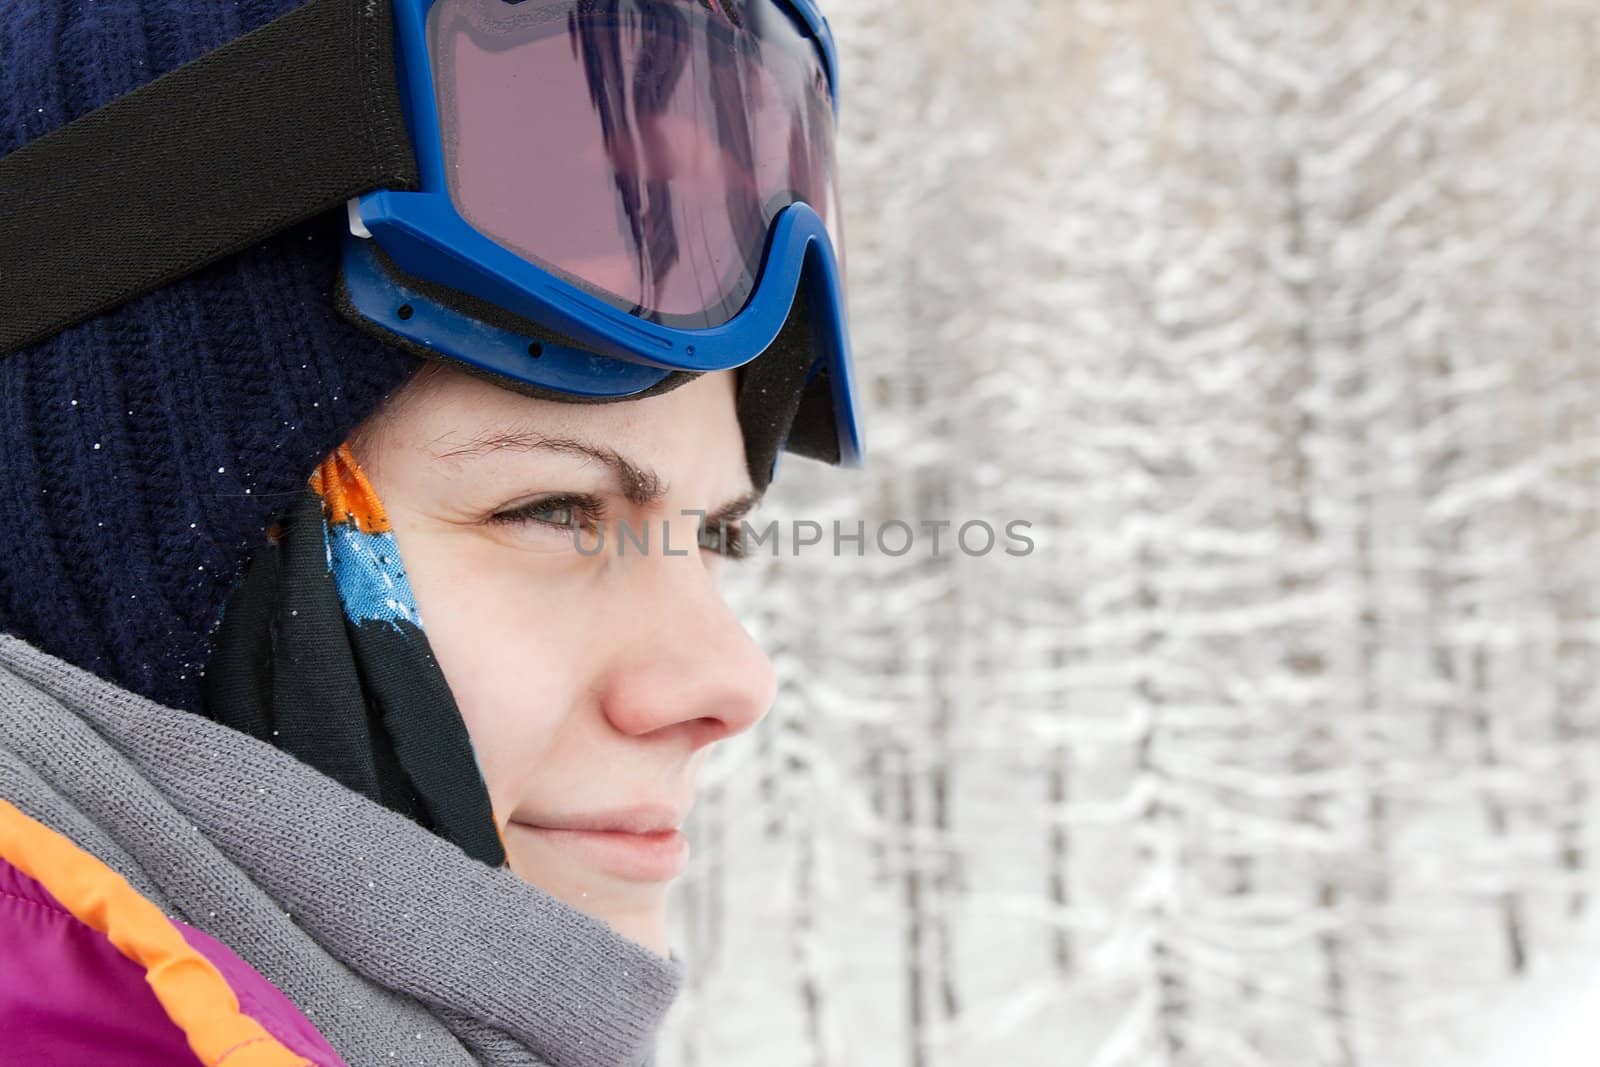 Portrait of a woman in skiing